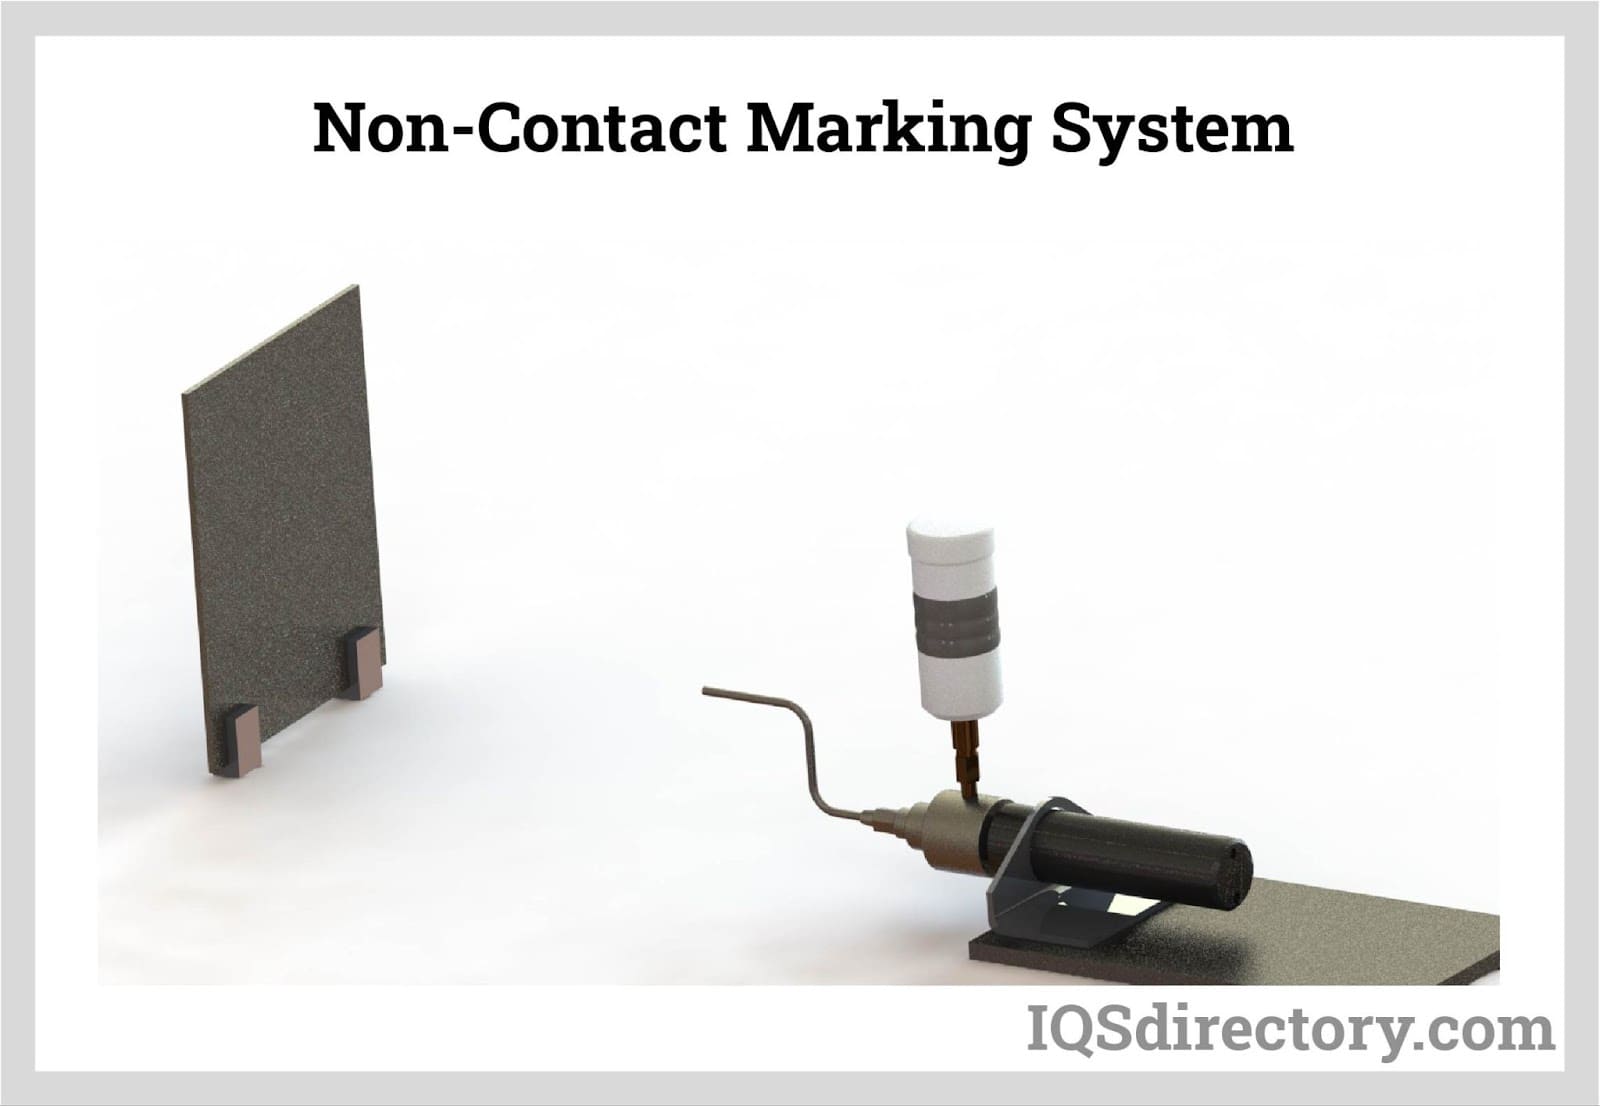 Non-Contact Marking System